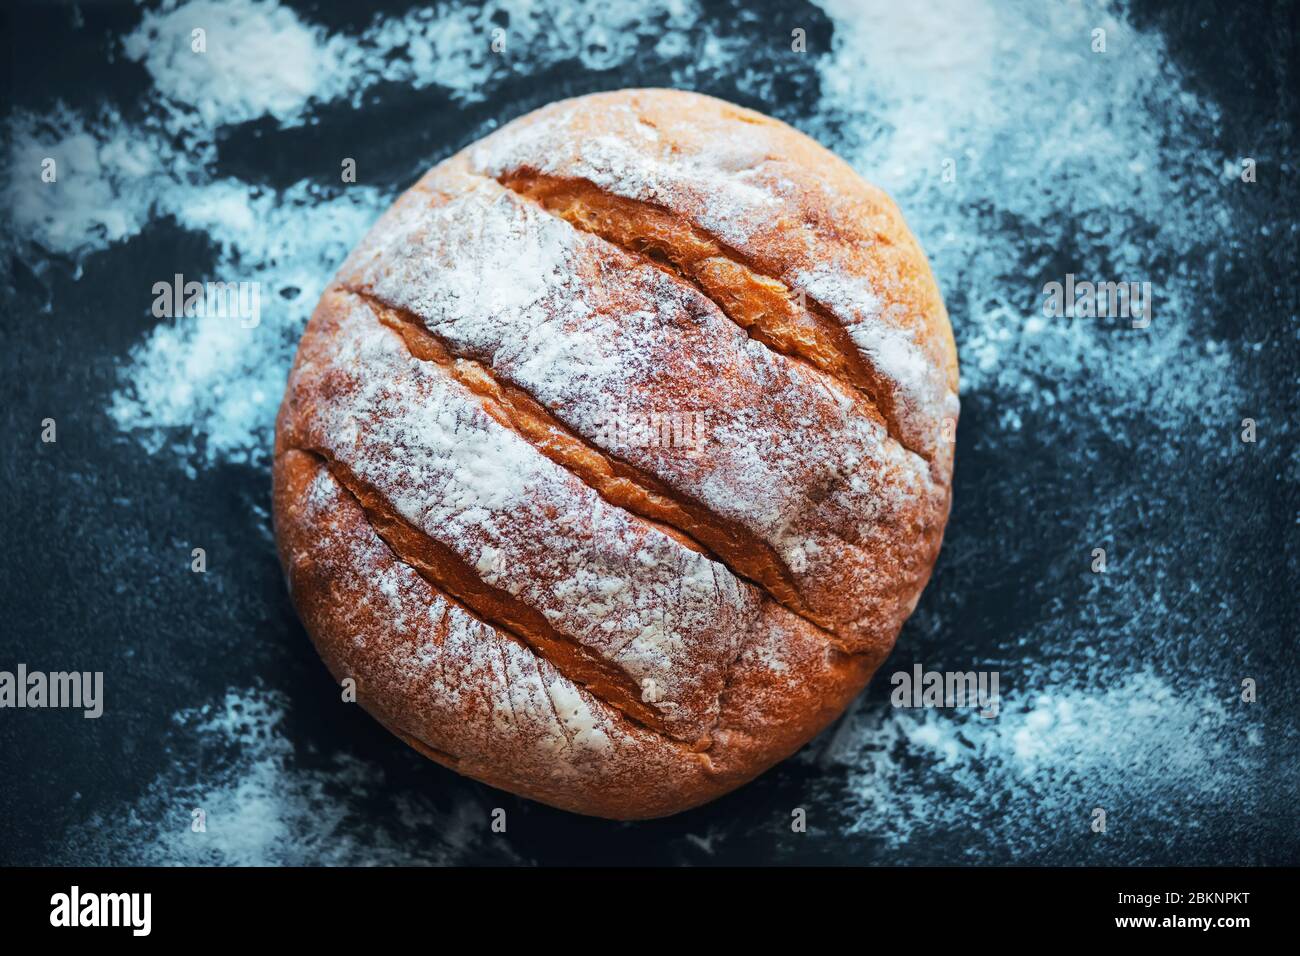 https://c8.alamy.com/comp/2BKNPKT/fresh-warm-round-homemade-bread-made-from-wheat-flour-lies-on-a-dark-tray-stained-with-flour-the-view-from-the-top-2BKNPKT.jpg